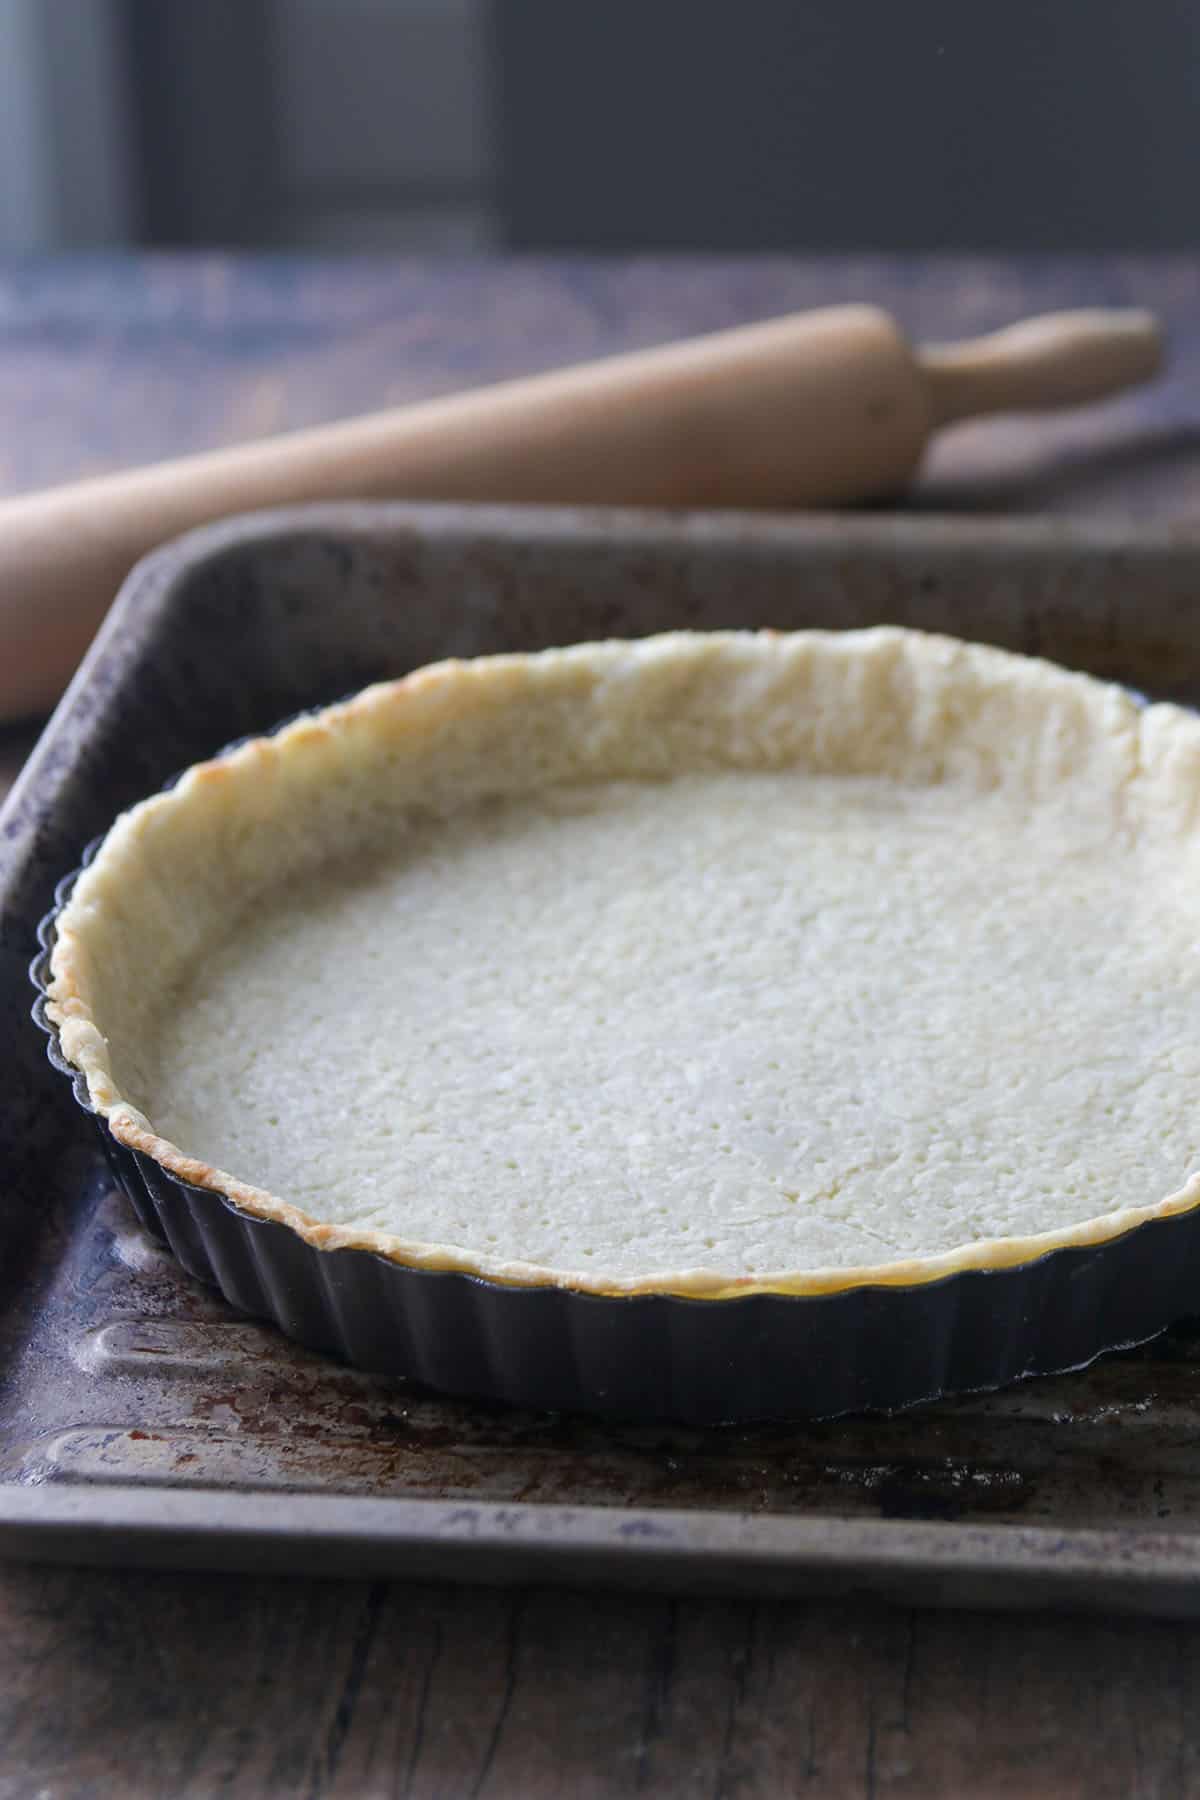 The cream cheese tart crust after blind baking.